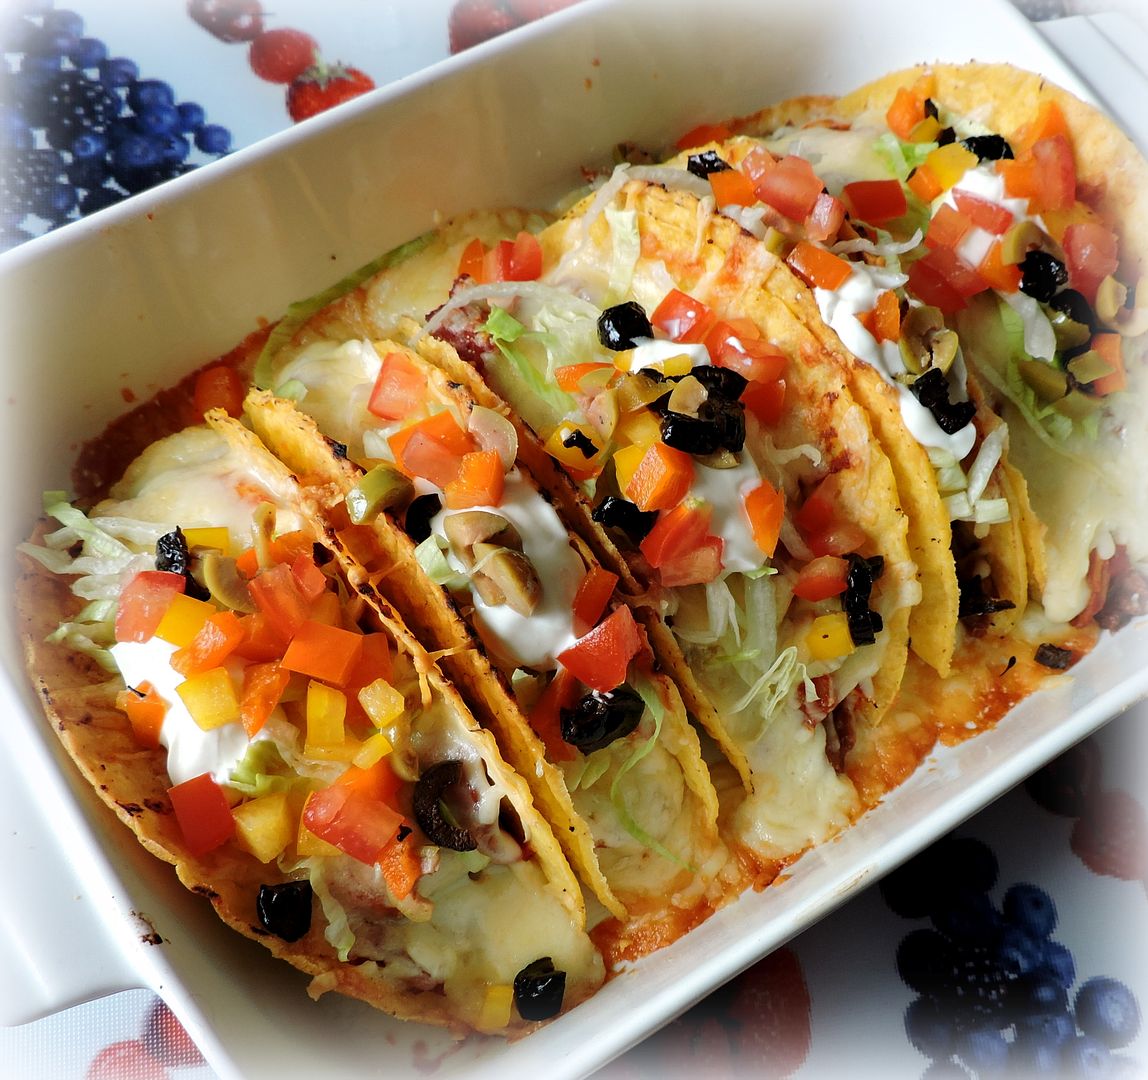 Oven-Baked Spicy Chicken Tacos